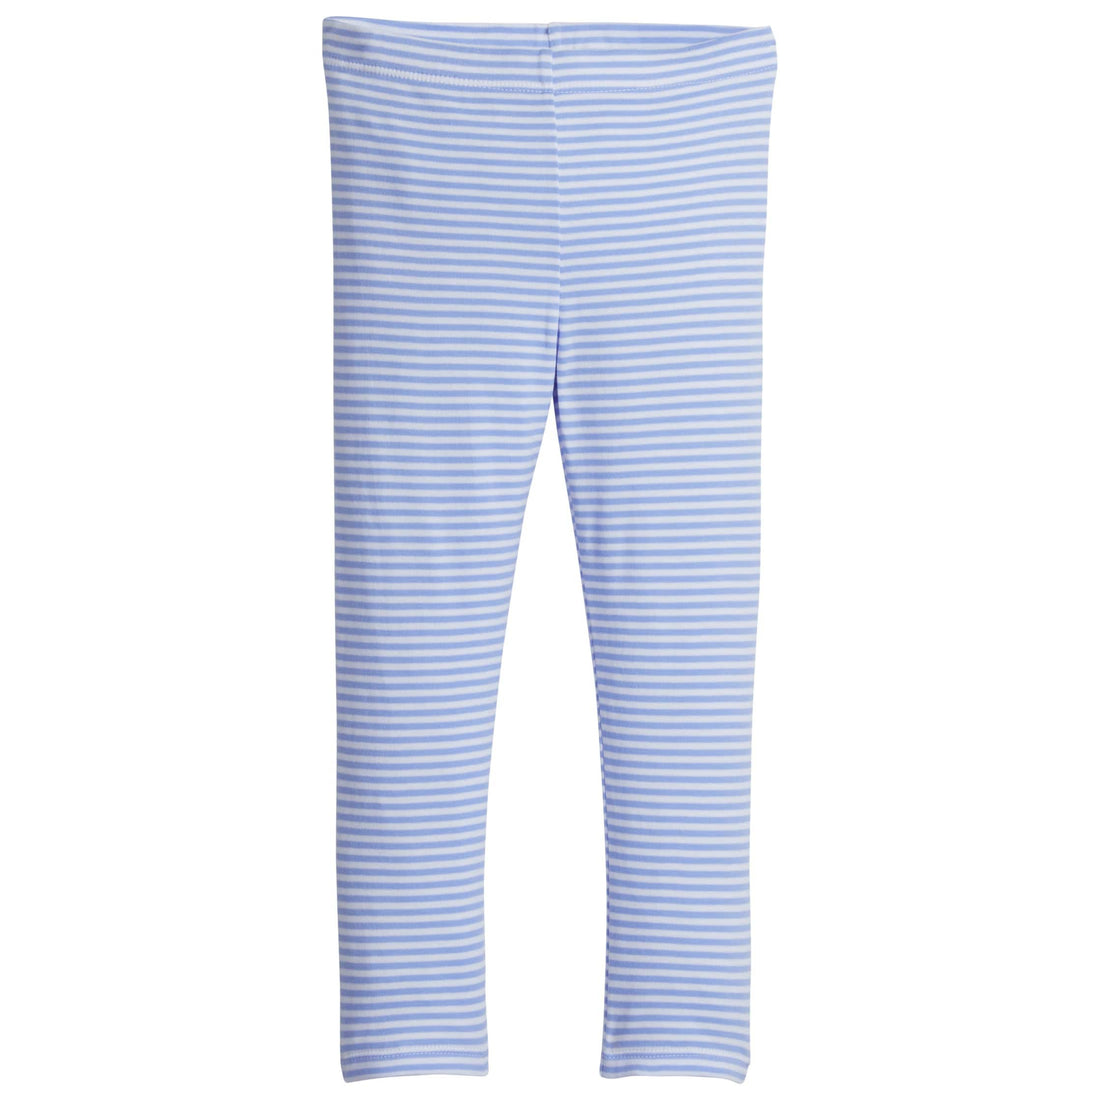 little english classic childrens clothing girls light blue and white striped stretchy legging